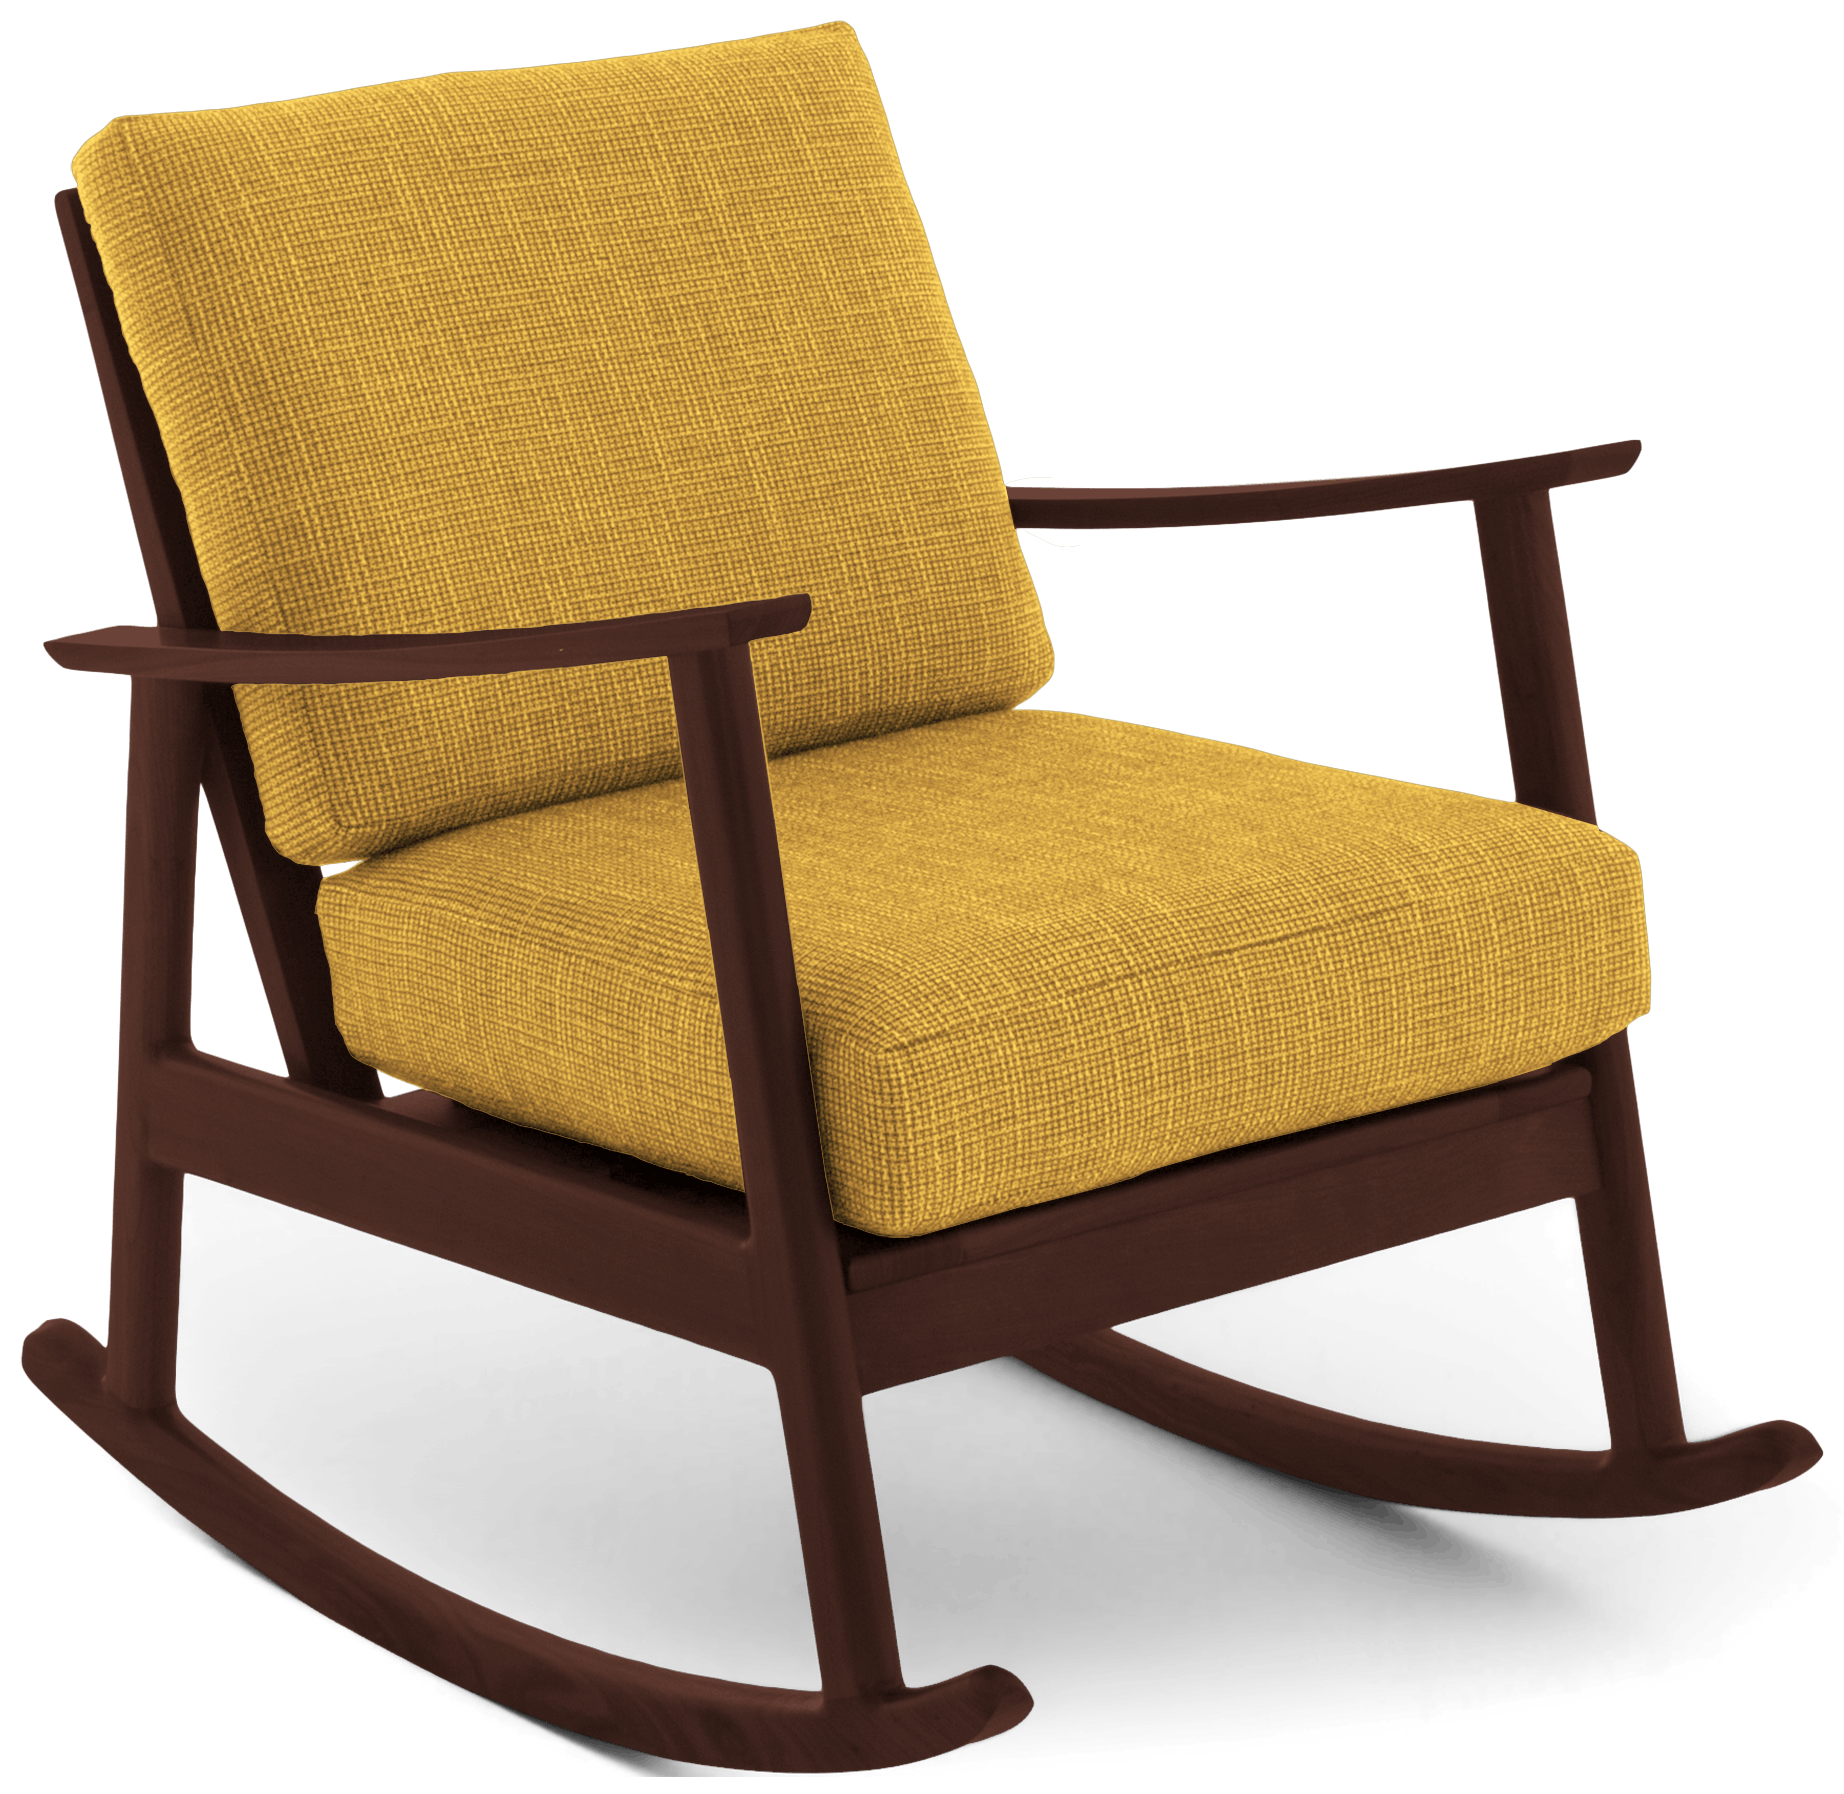 Download PNG image - Rocking Chair Transparent Isolated Background 